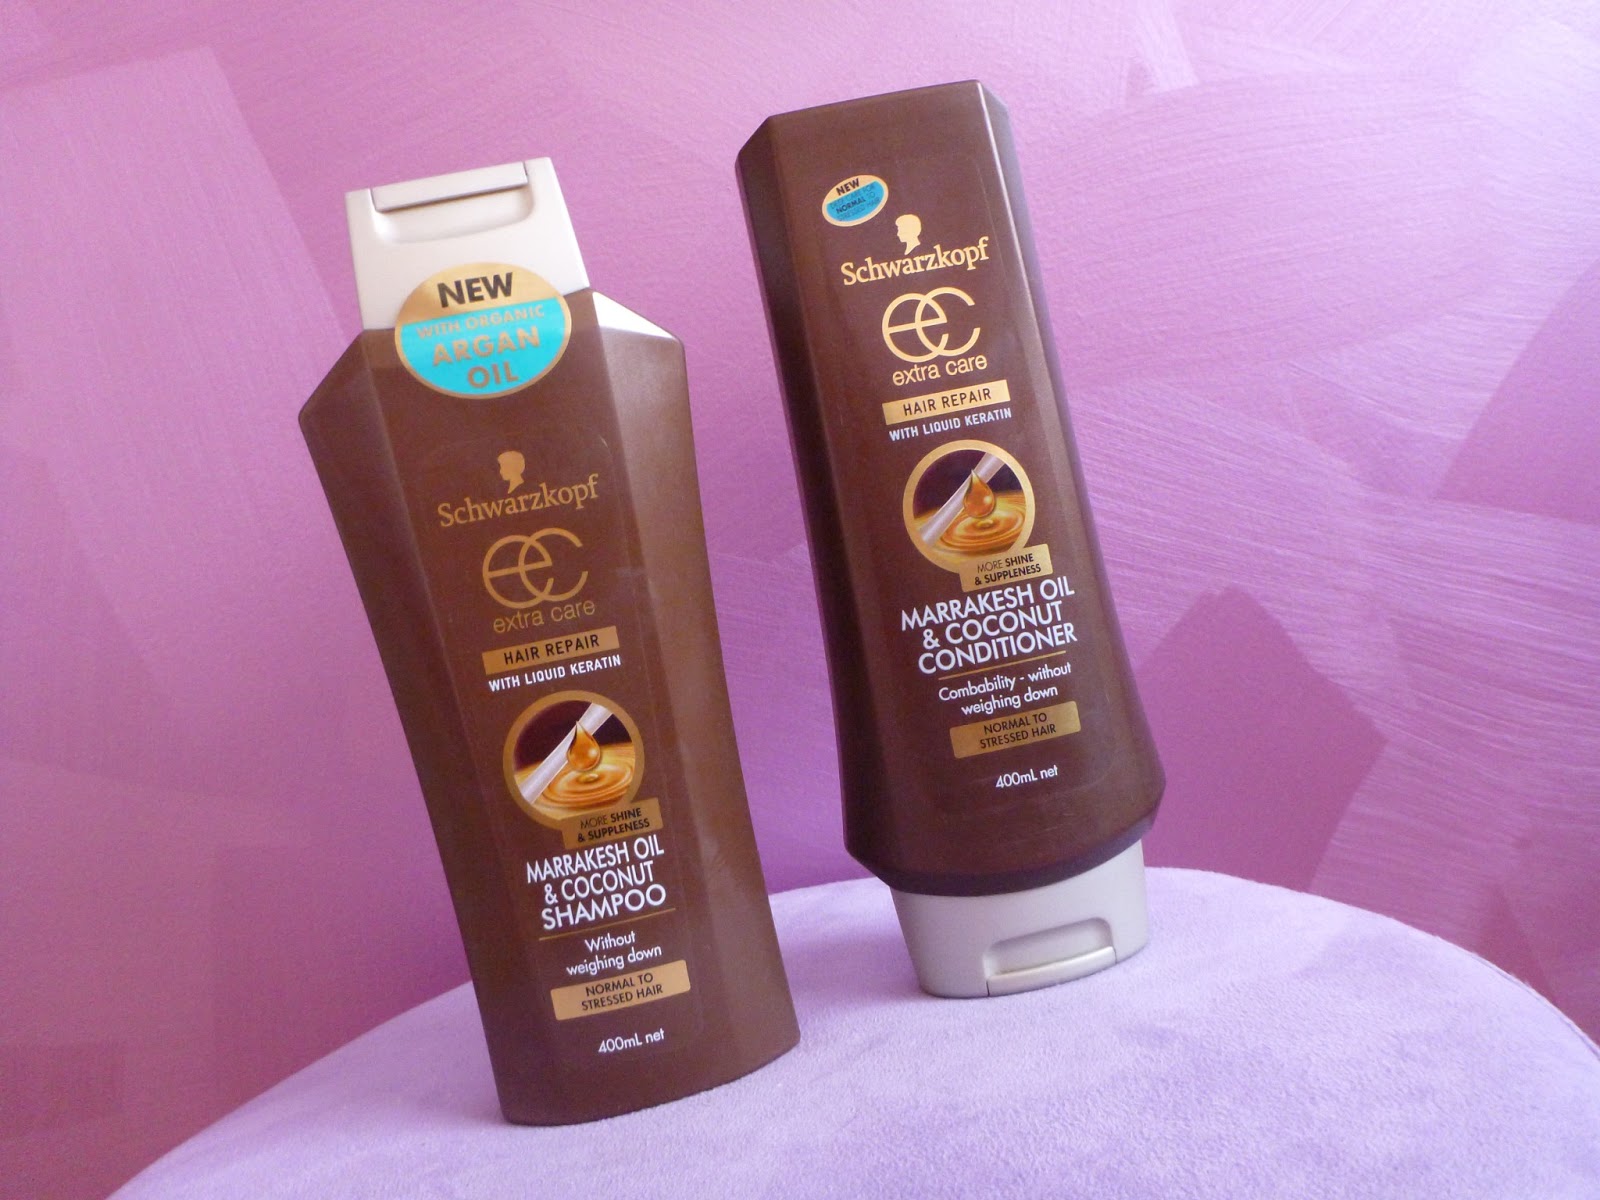 Australian Beauty Review: Review of the Schwarzkopf Extra Care Marrakesh Oil Coconut Shampoo & Conditioner